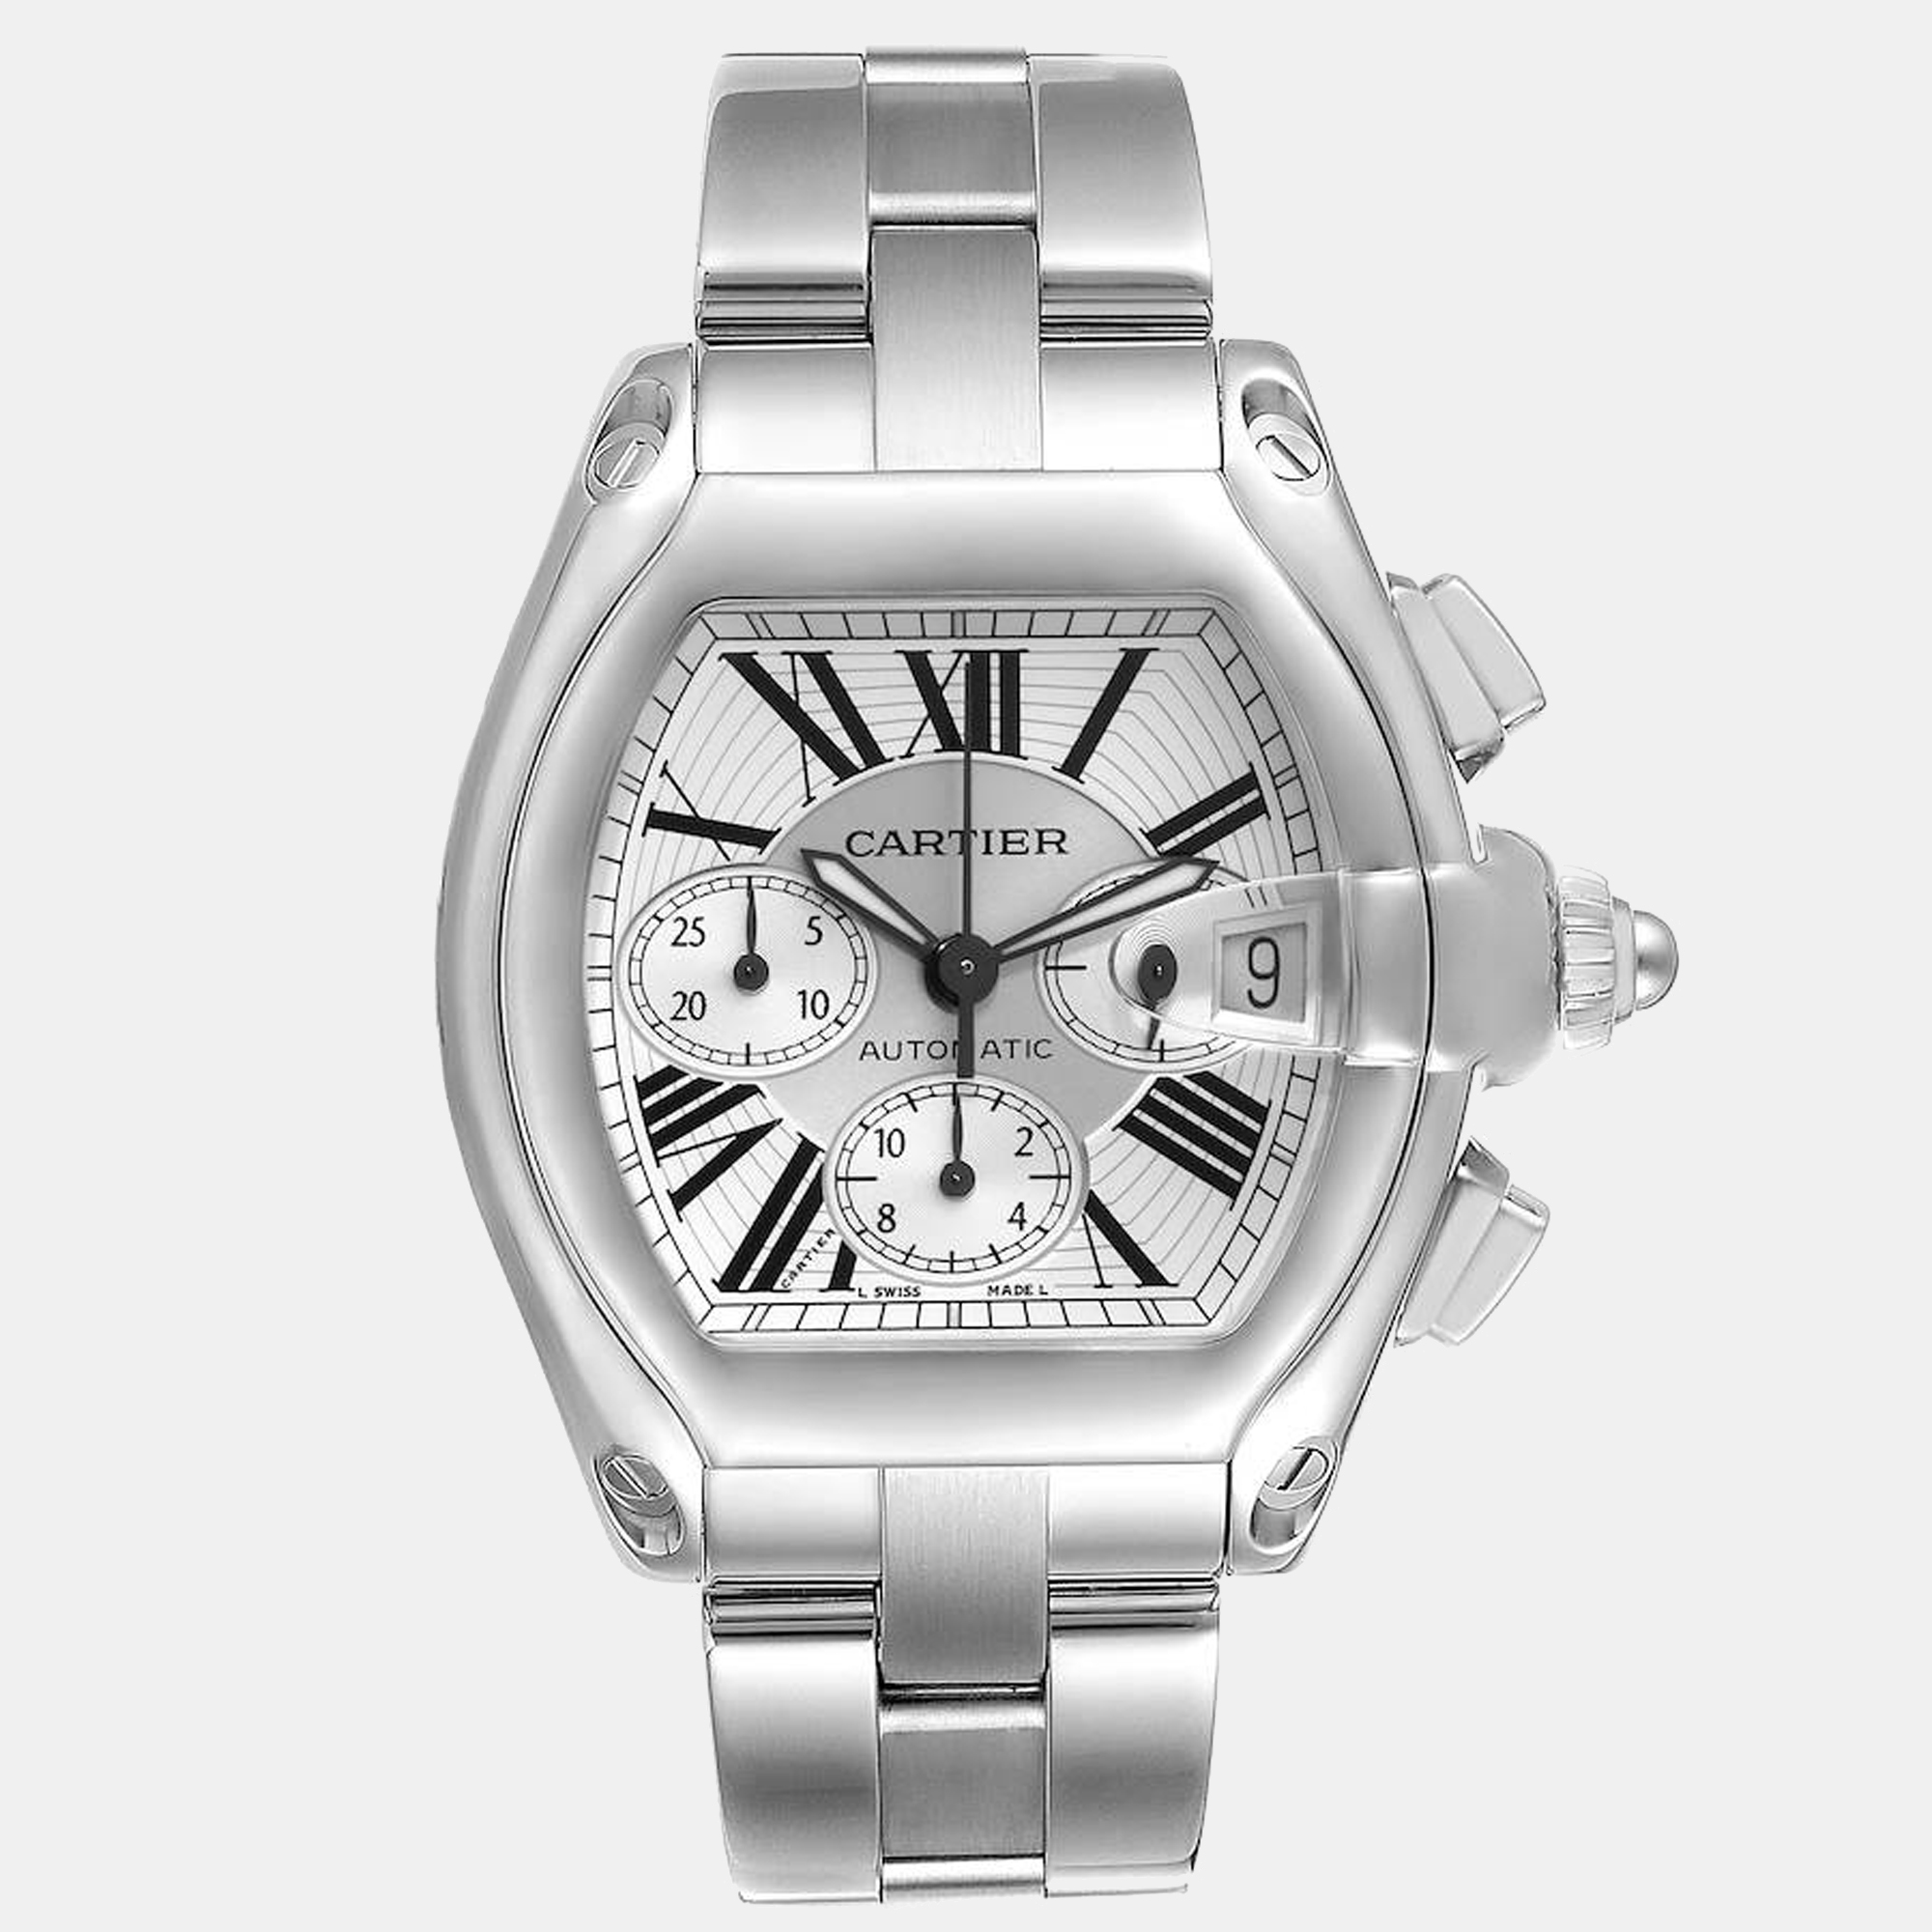 Sophisticated design and traditions of fine watchmaking characterize this authentic Cartier timepiece. Grace your wrist with this luxurious piece and instantly elevate your day.